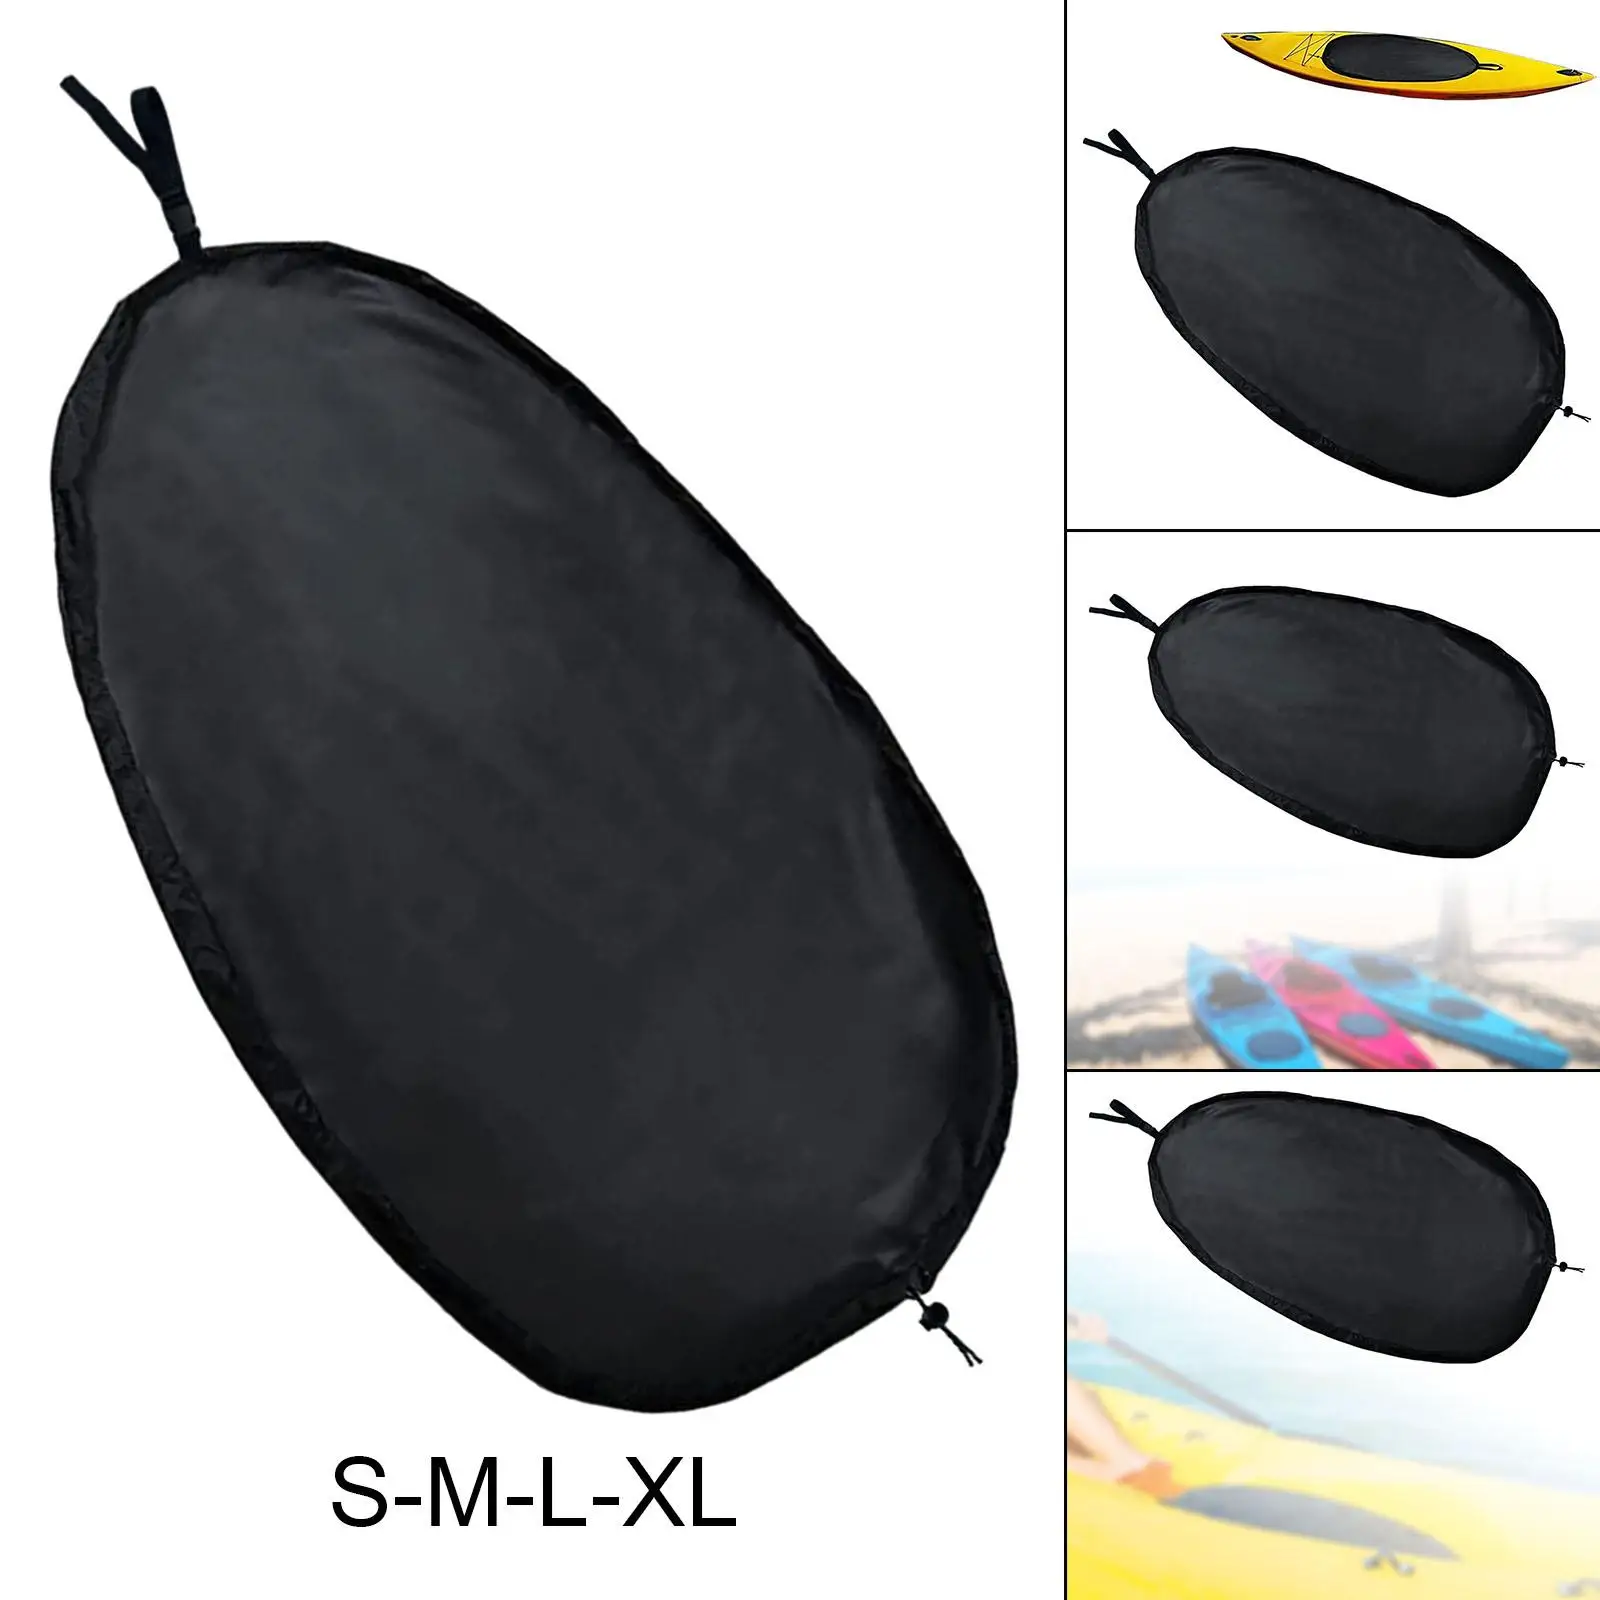 Universal Kayak Cockpit Cover Dust Cover Kayak Seat Cover for Outdoor